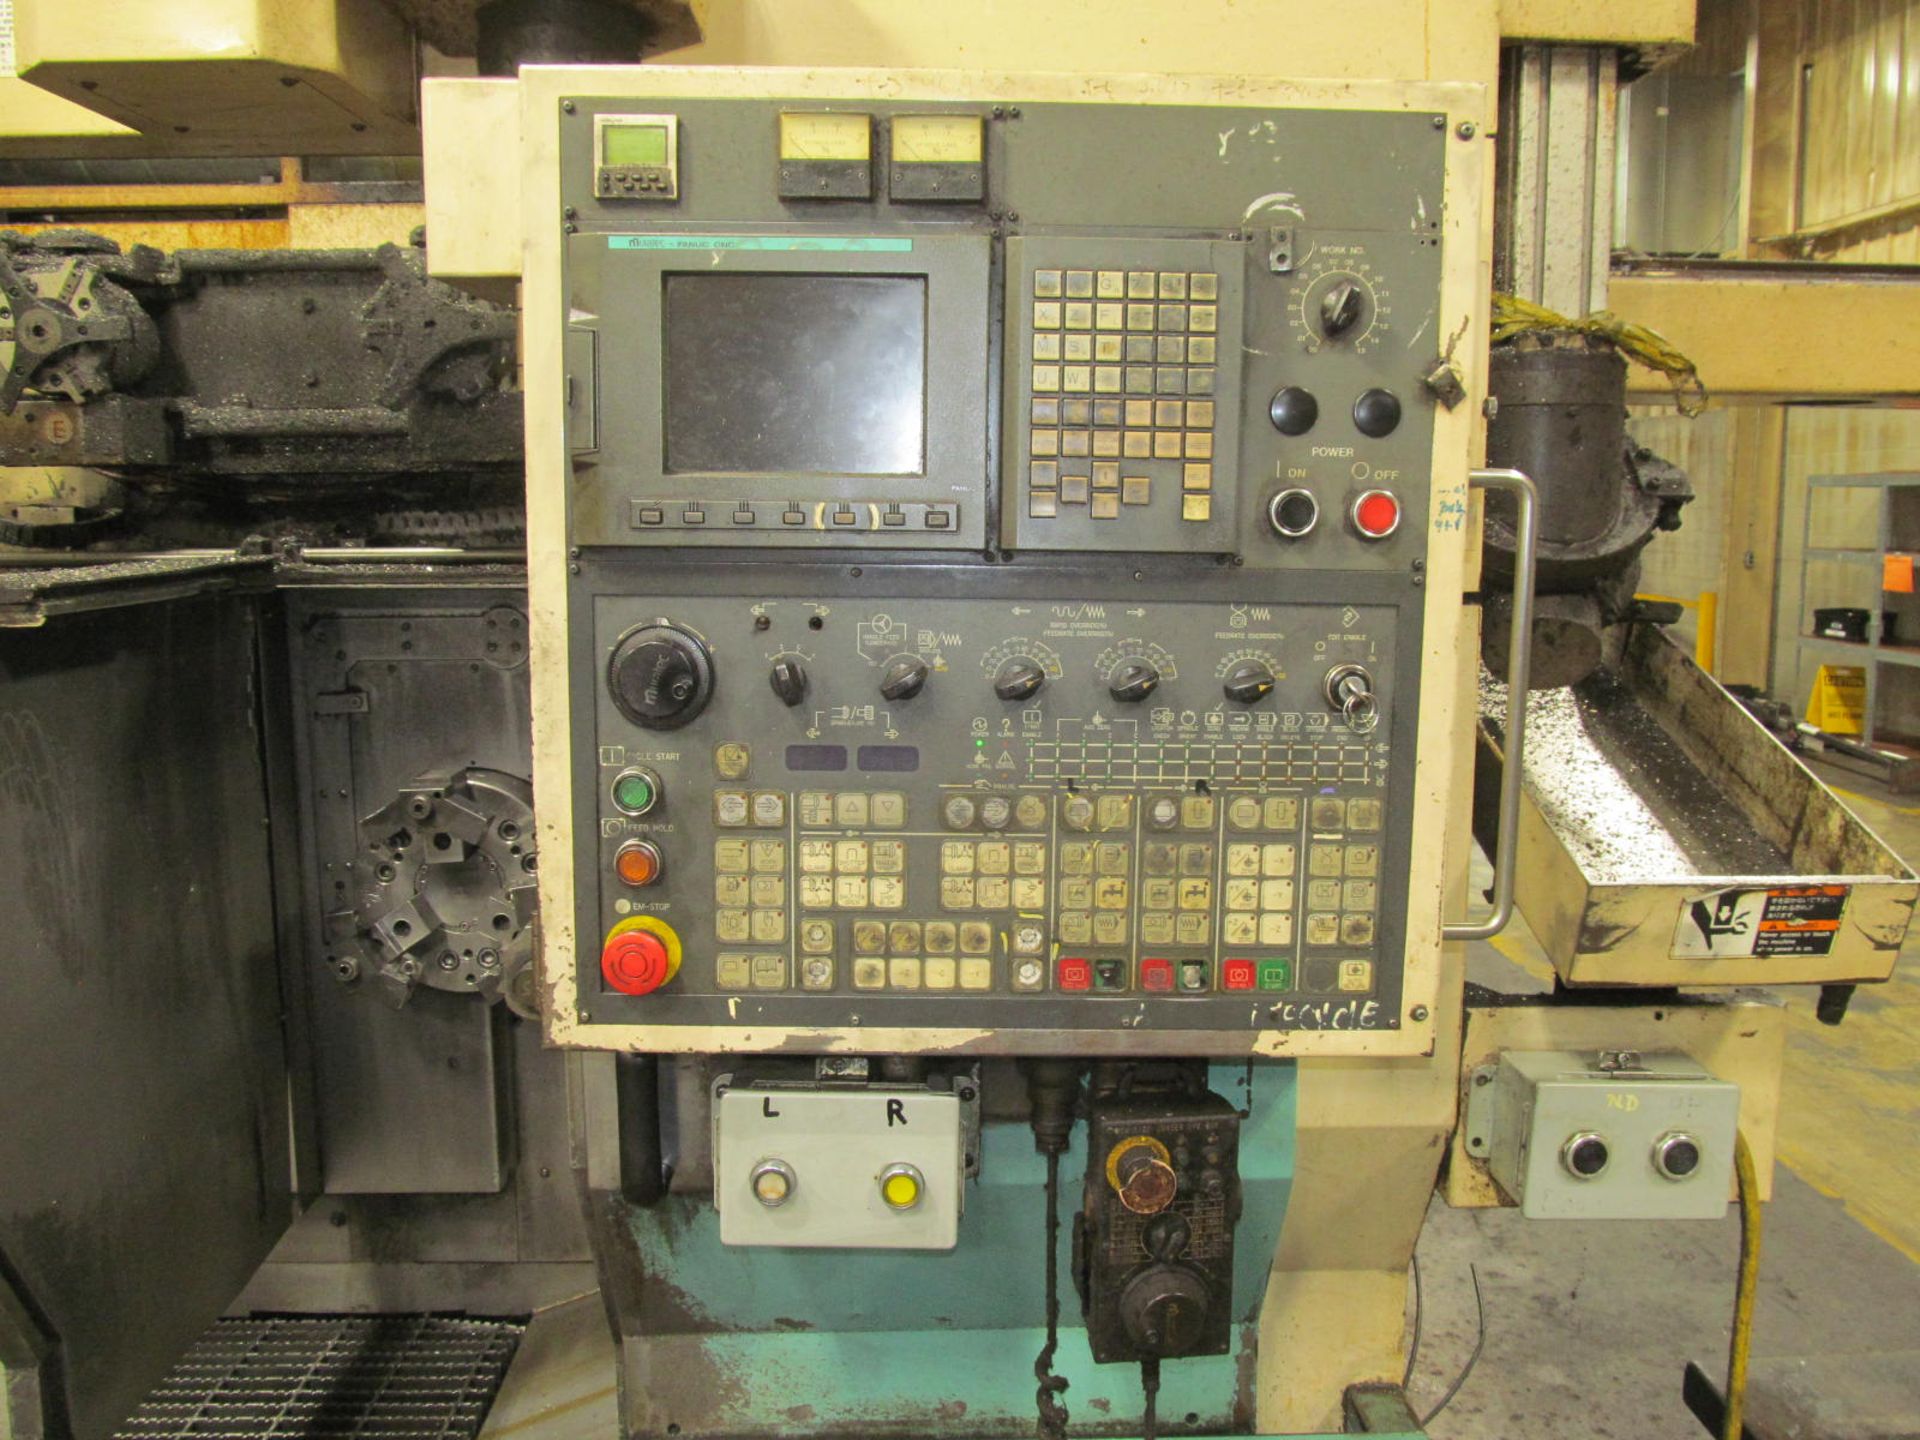 2000 MURATA MW200 MC9-442 4-Axis Turning Center, s/n 9KX9365660, w/ MAYFRAN Chip Conveyor - Image 5 of 6